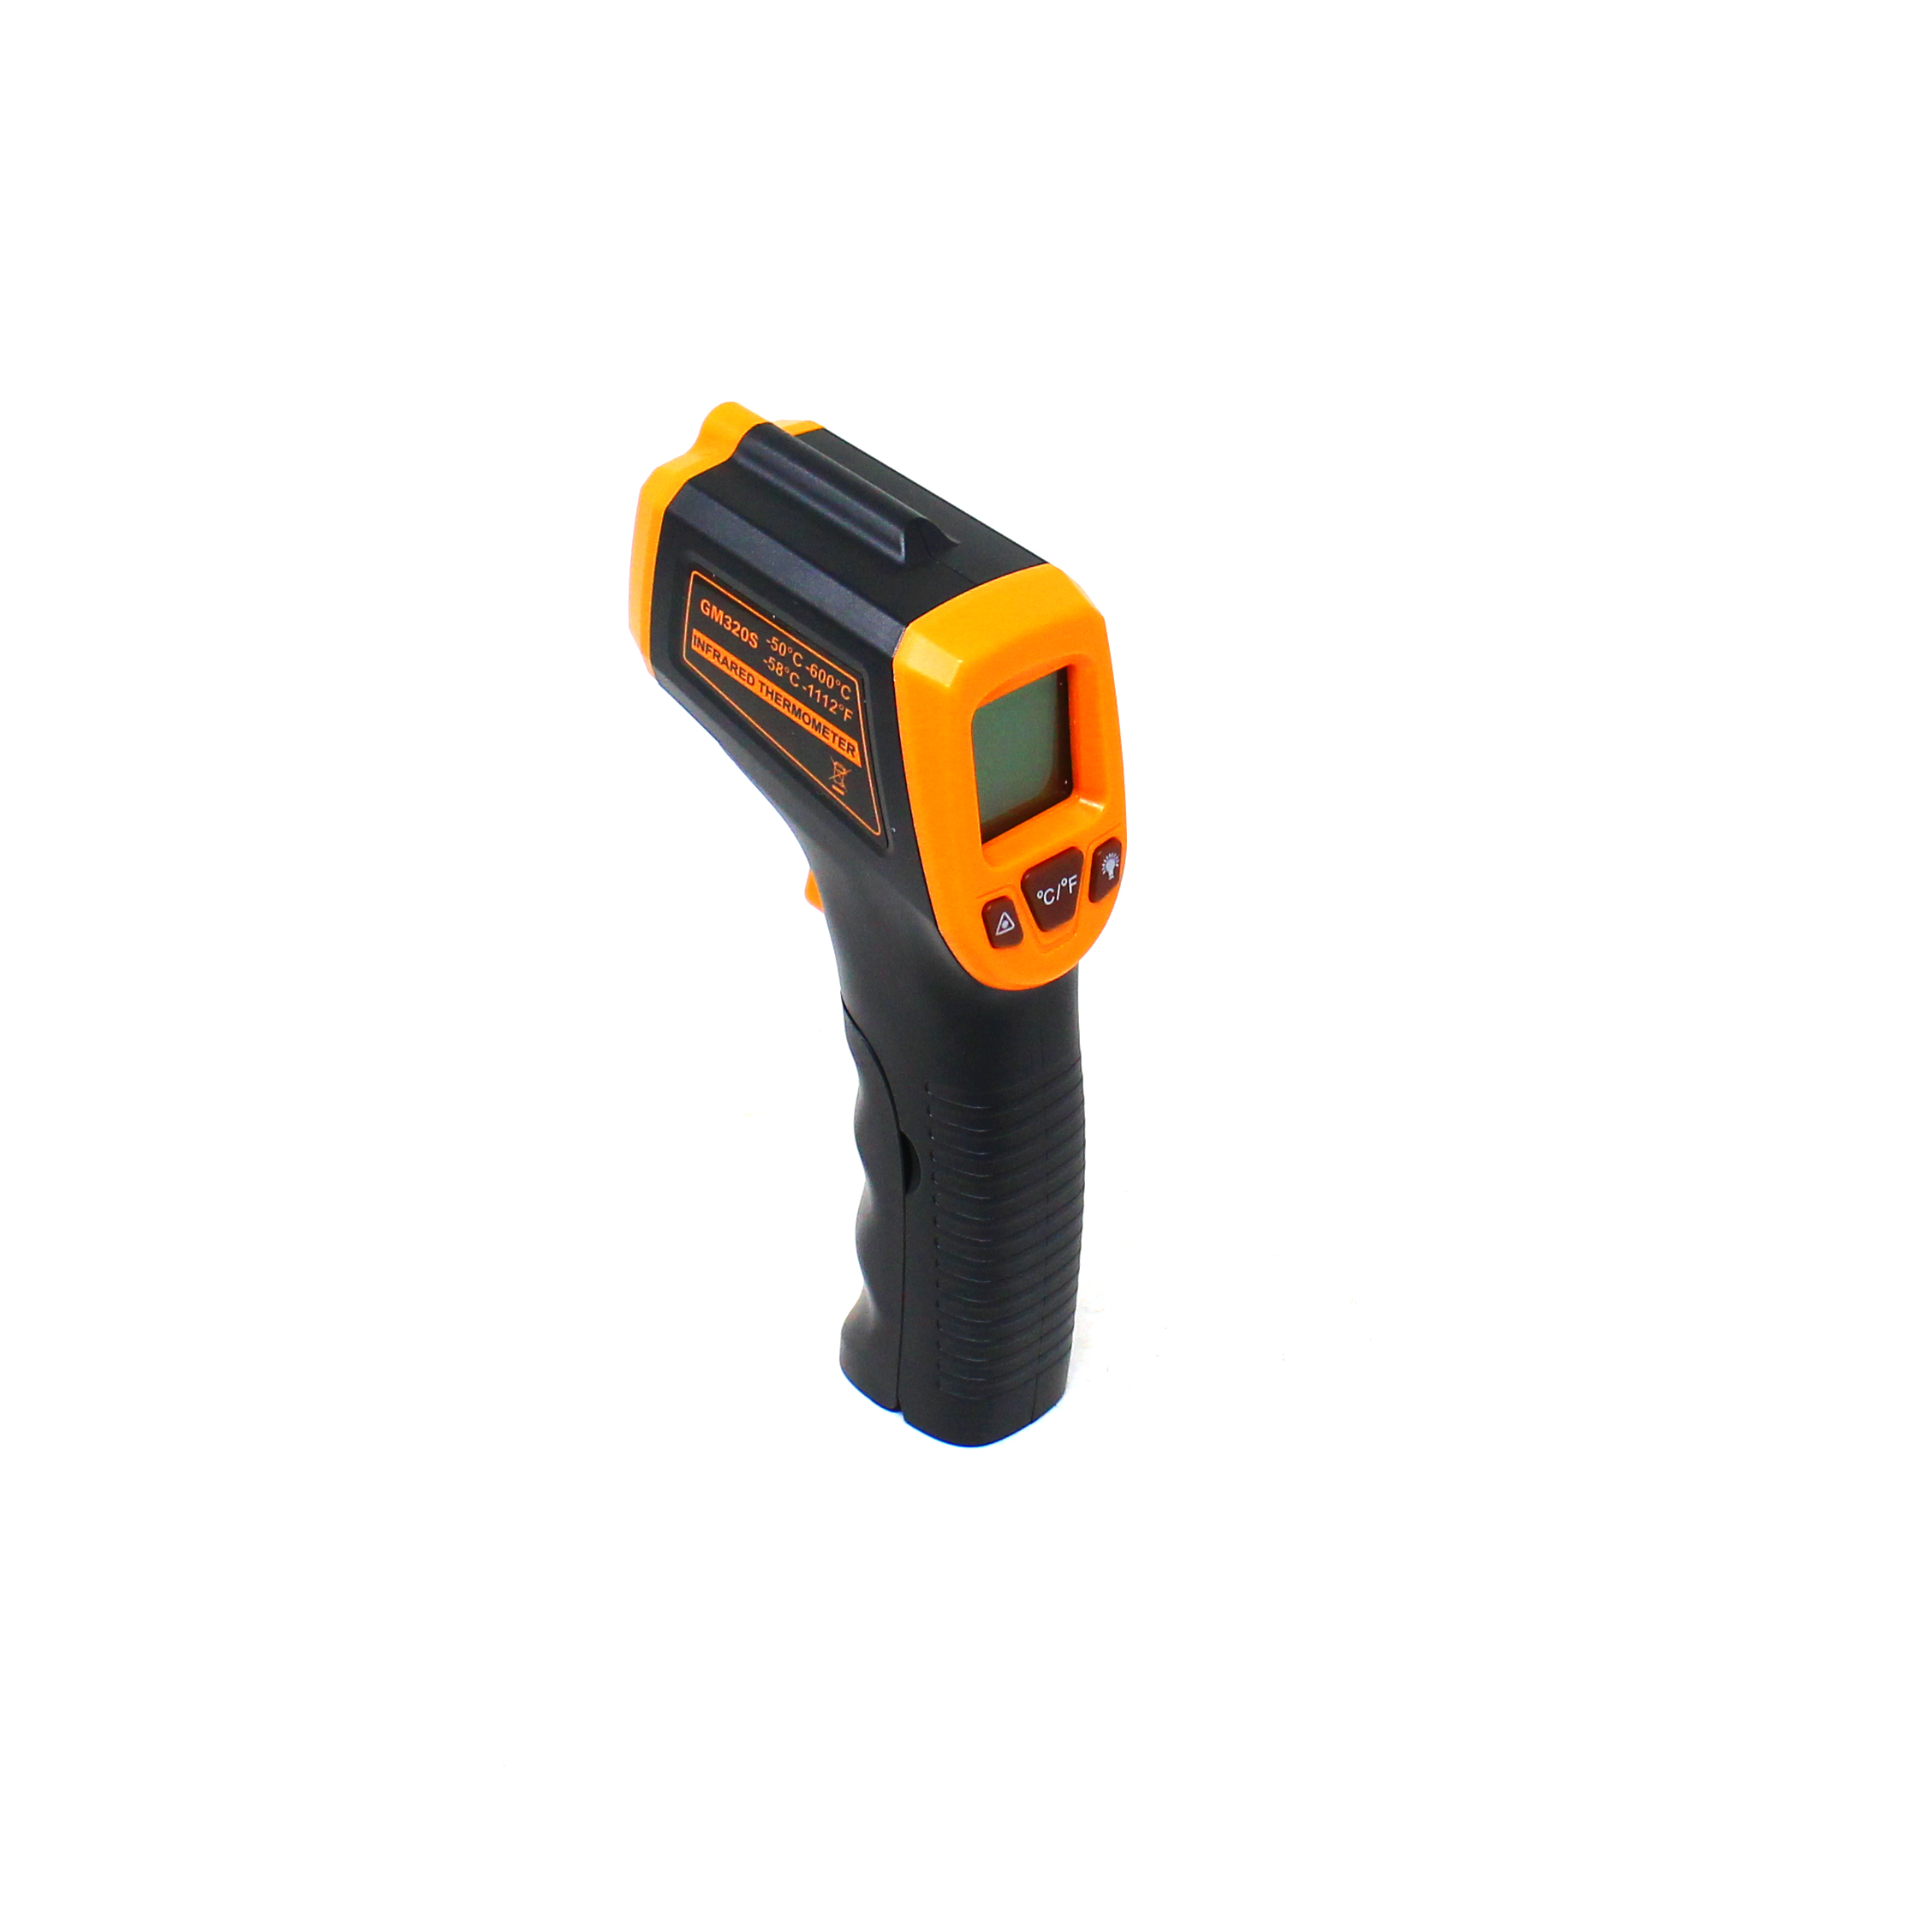 Junior 'Just Point' Infrared Thermometer.